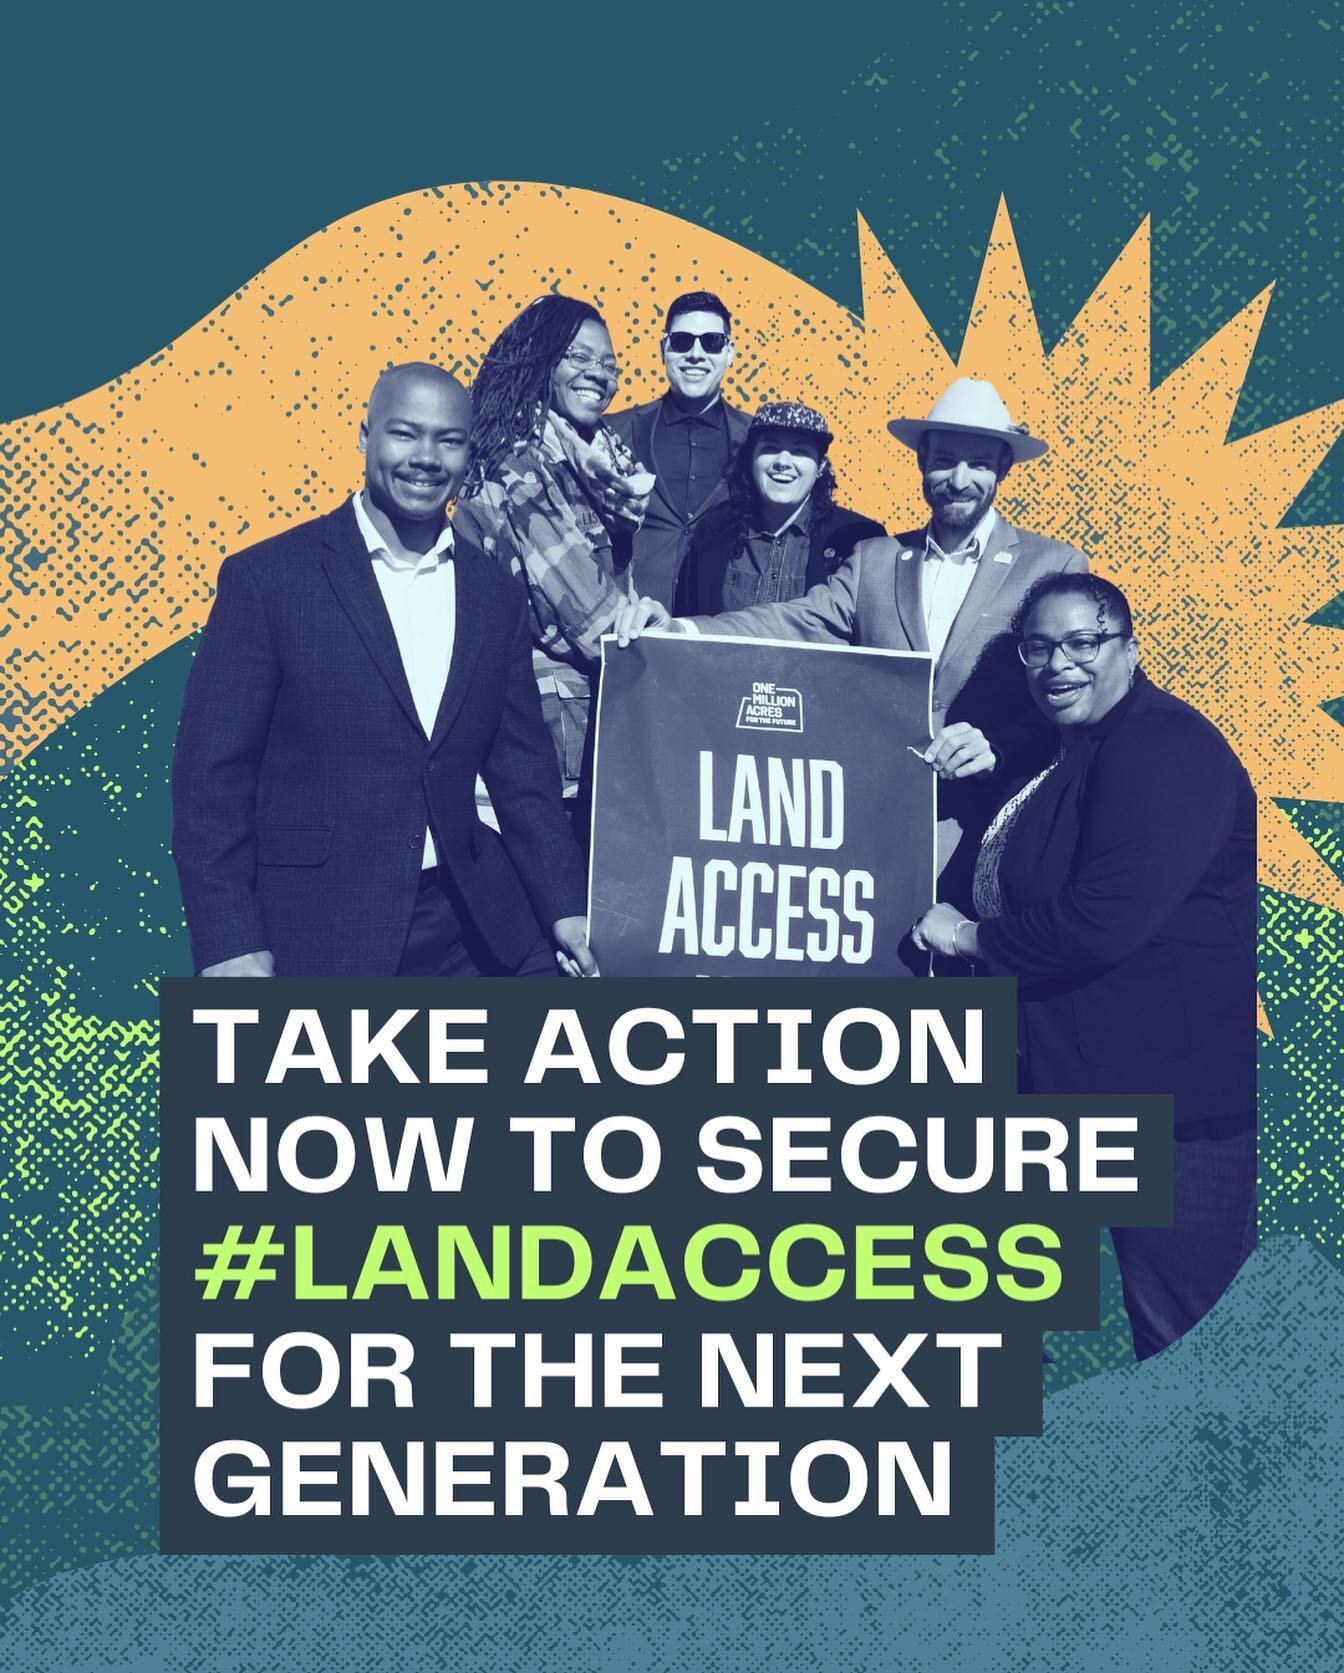 Inspired by @youngfarmers to call our CT reps TODAY to support the Increasing Land Access, Security, and Opportunities Act through the 2023 Farm Bill. In the House, ask John Larson @repjohnblarson ‭(860) 278-8888‬ &amp; Jahana Hayes @repjahanahayes ‭